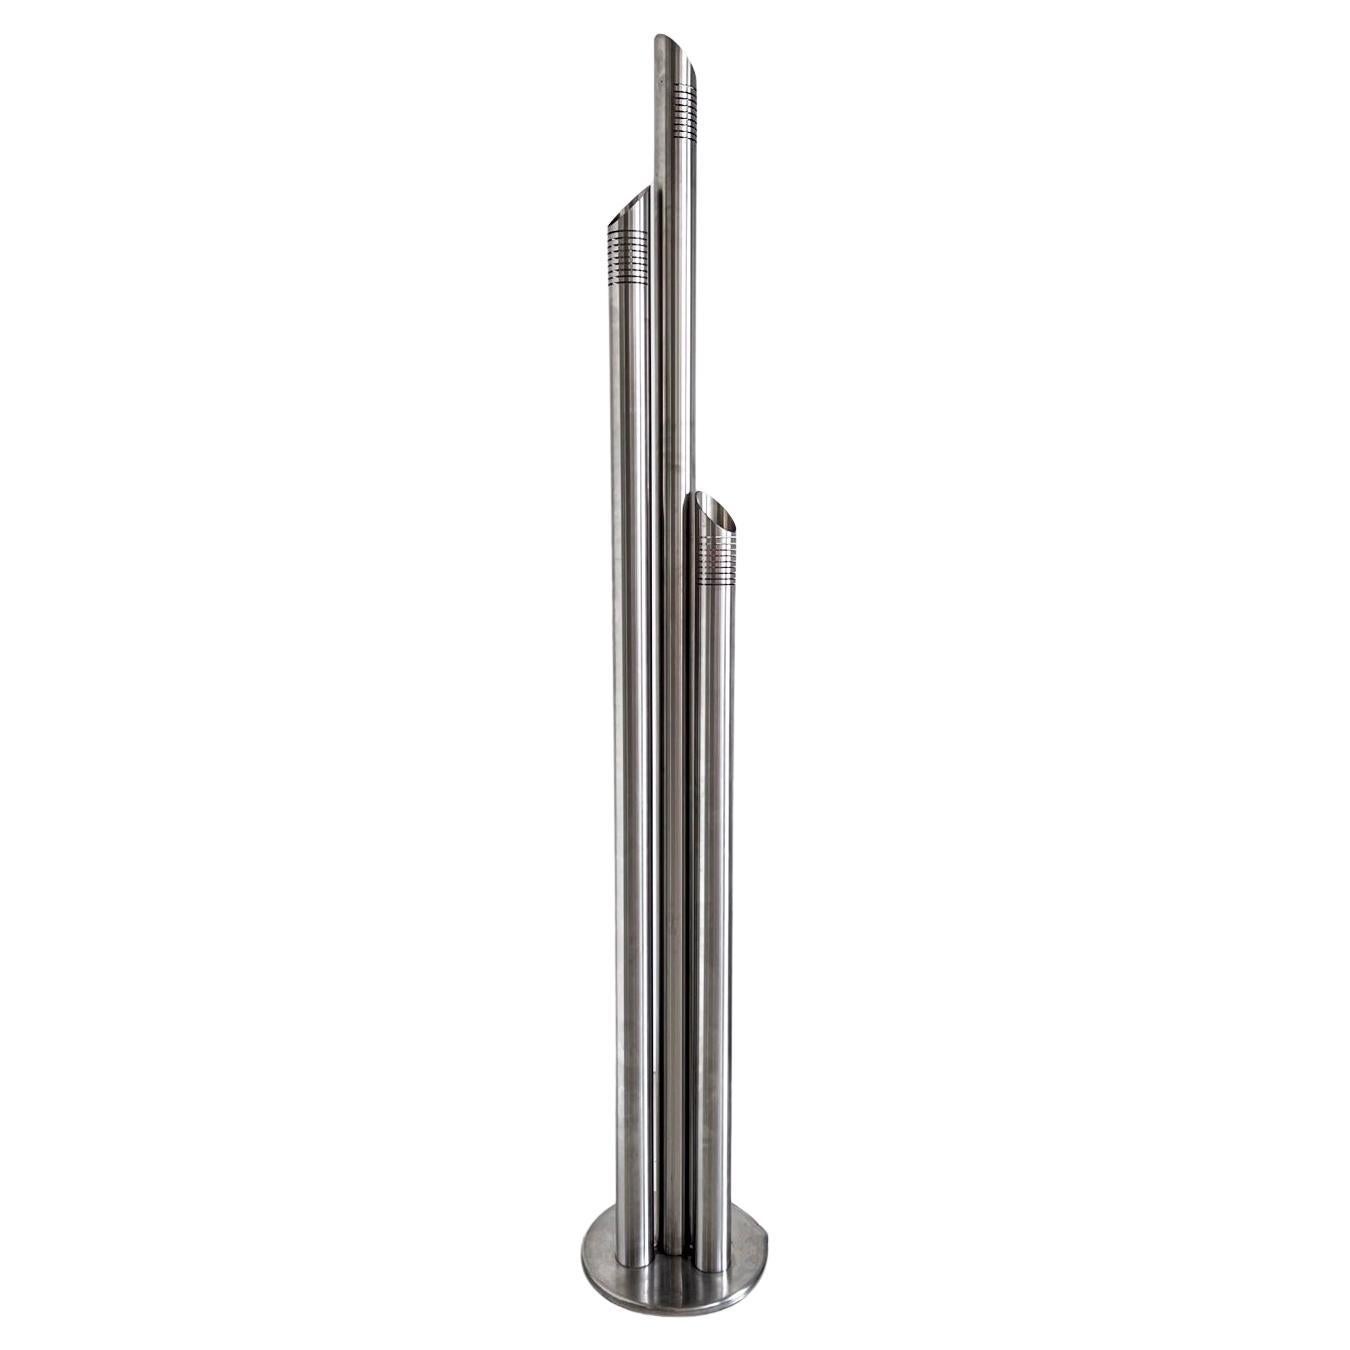 Stainless Steel Floor Lamp by Fontana for Reggiani, Italian Collectible Design